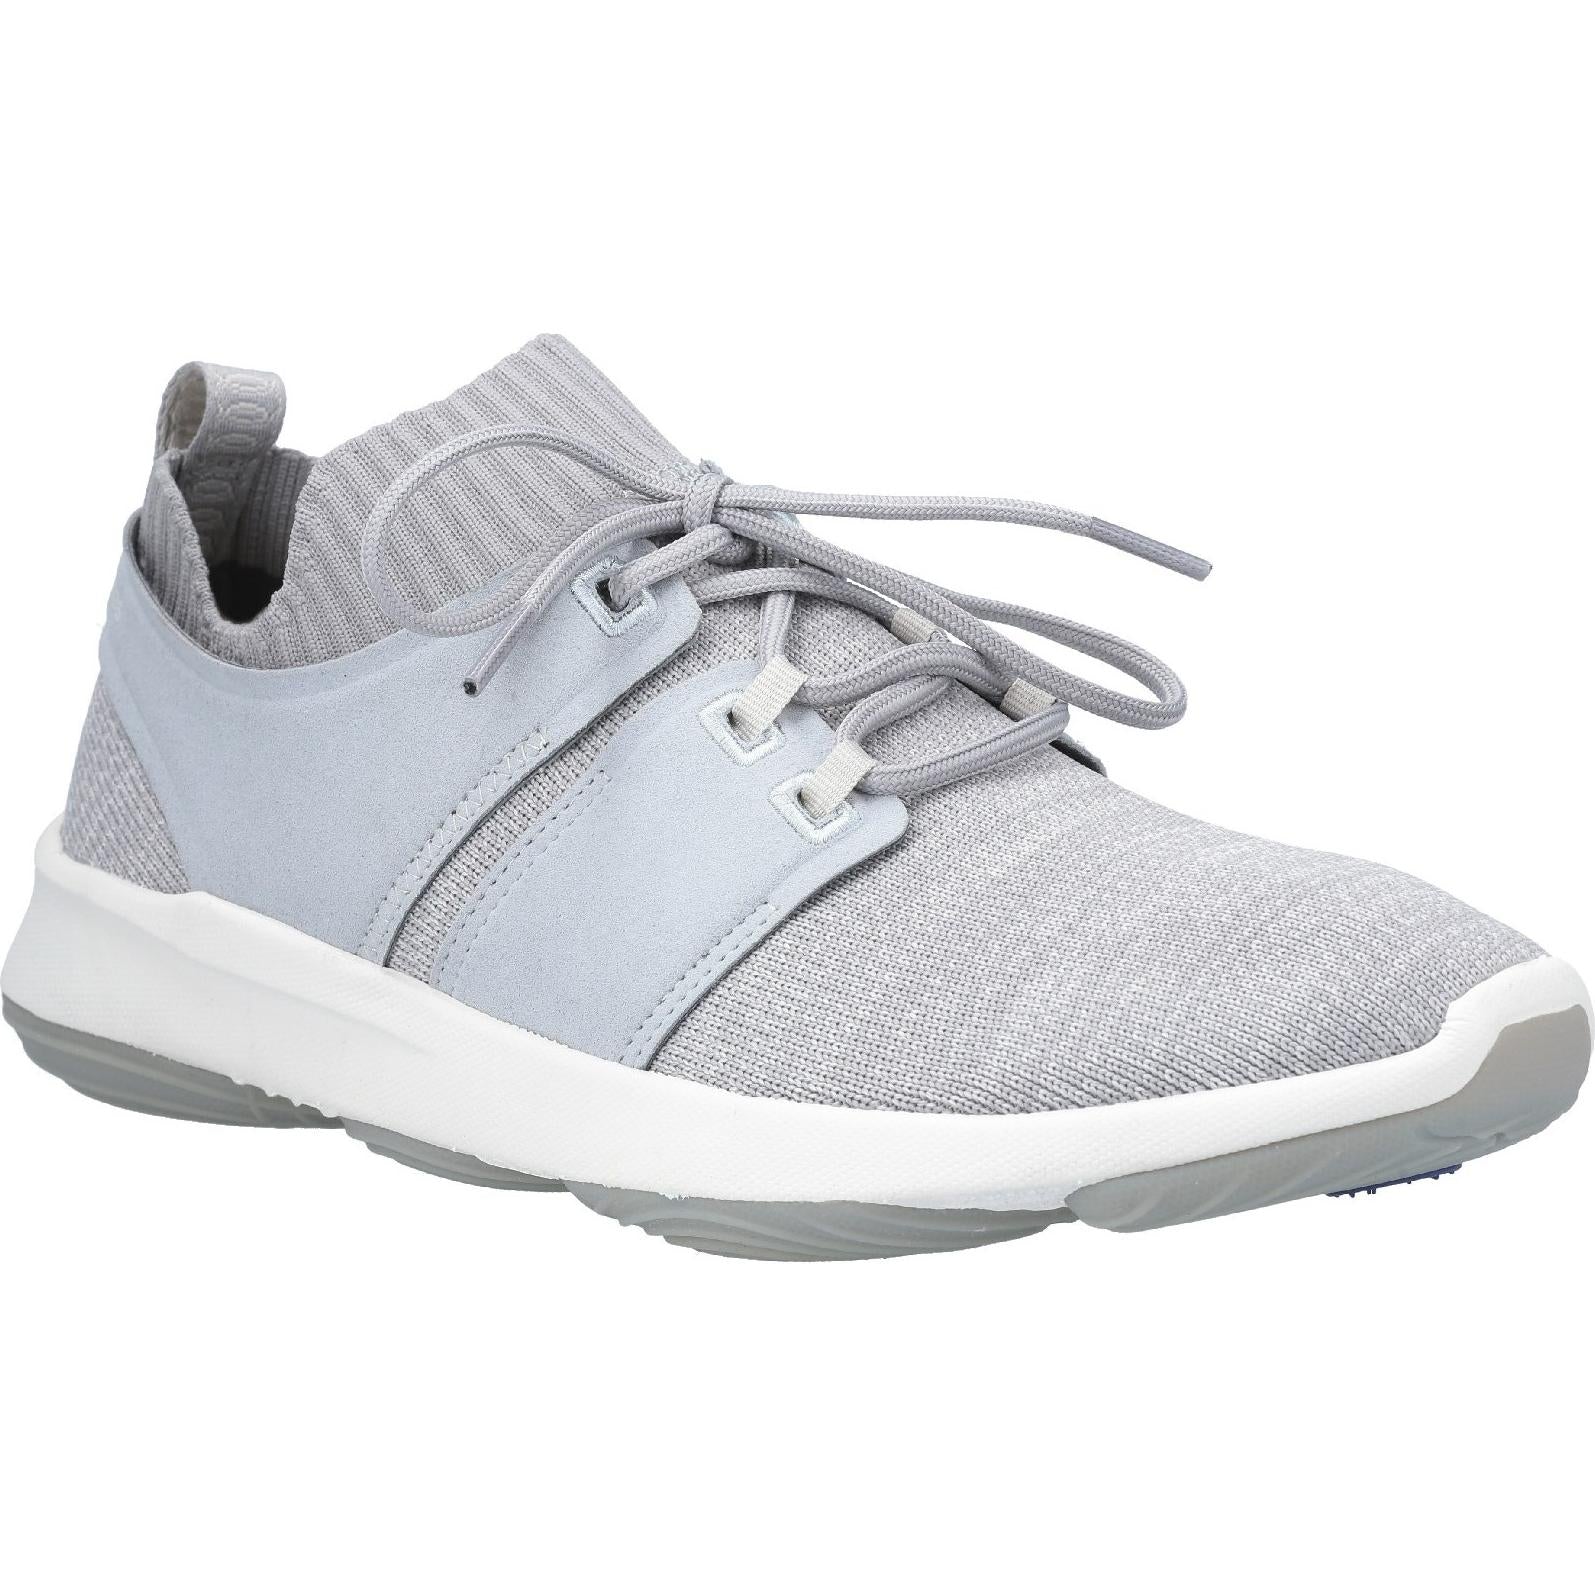 Hush Puppies World BounceMax Lace Up Trainer